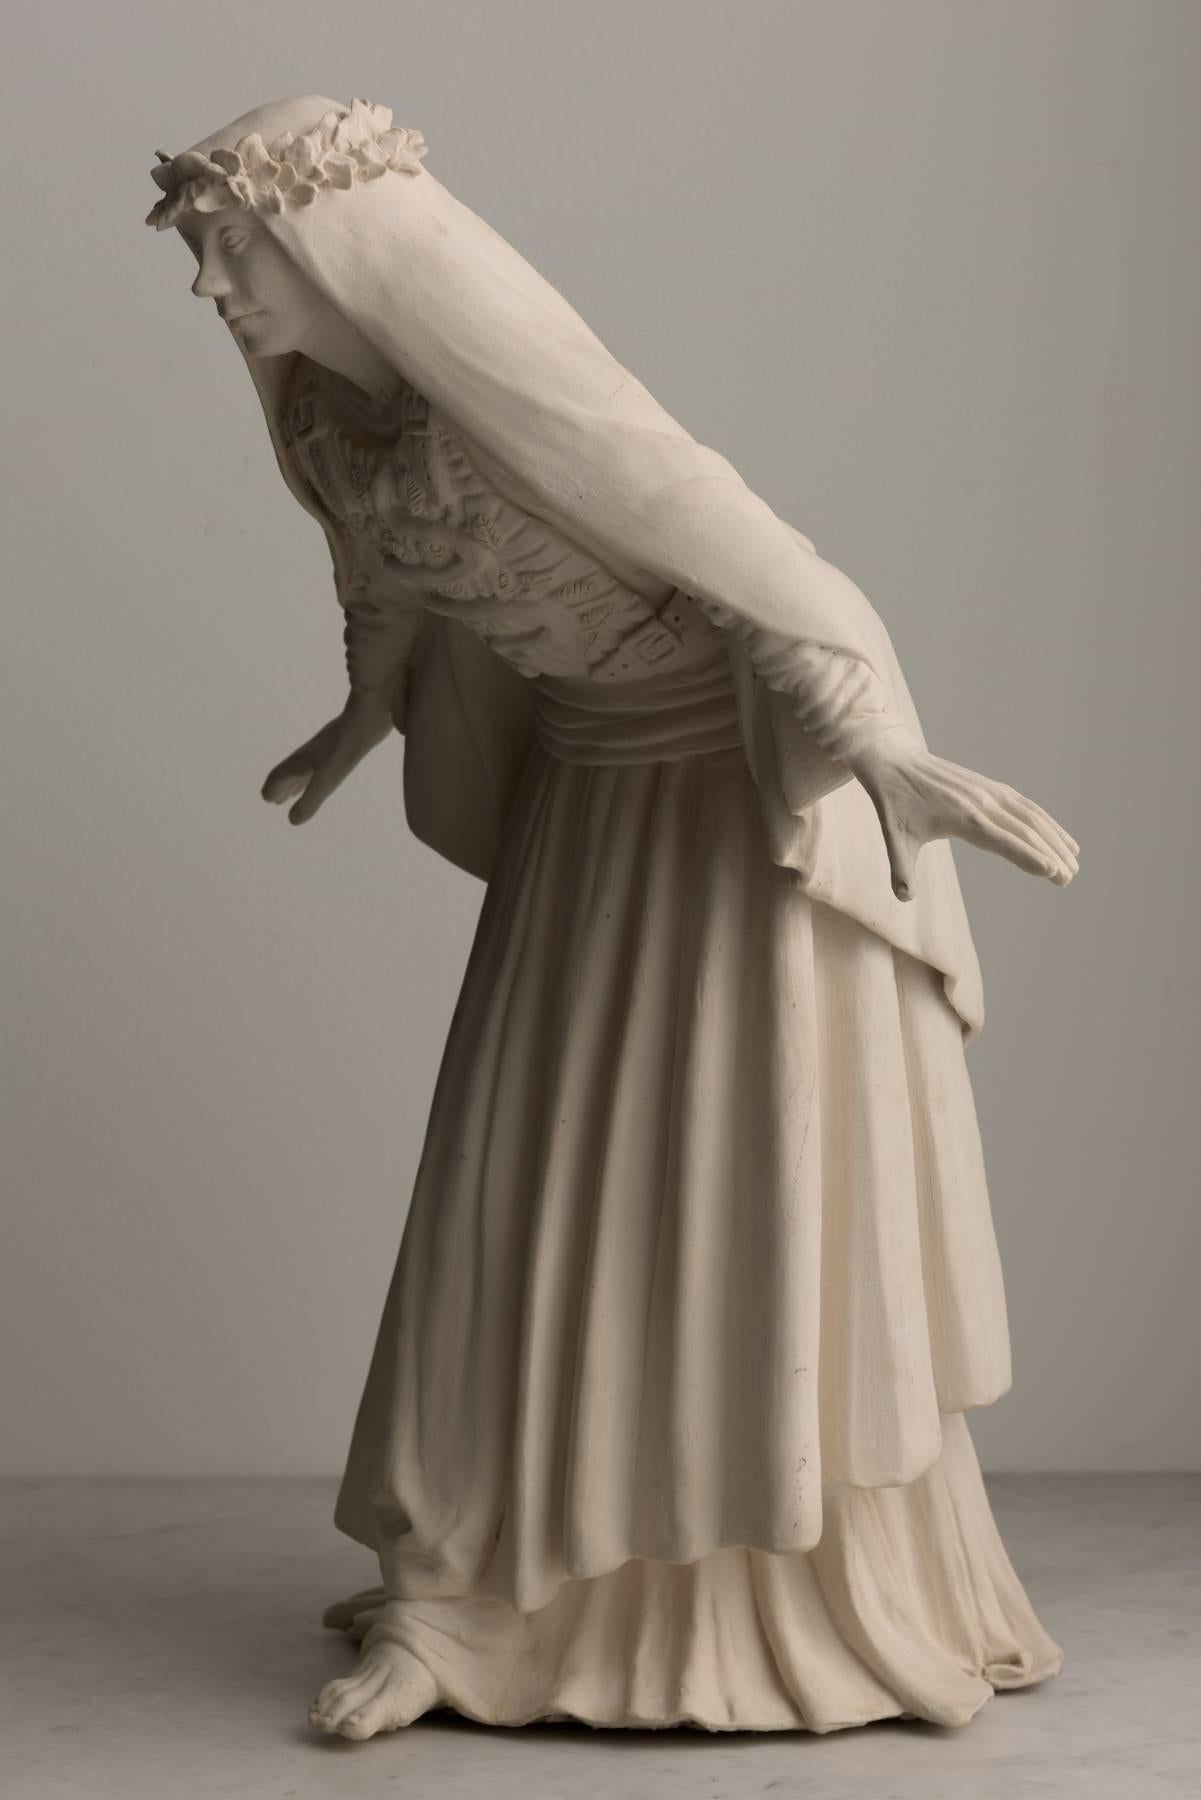 Homage to the Unknown Saints - Sculpture by Tricia Cline